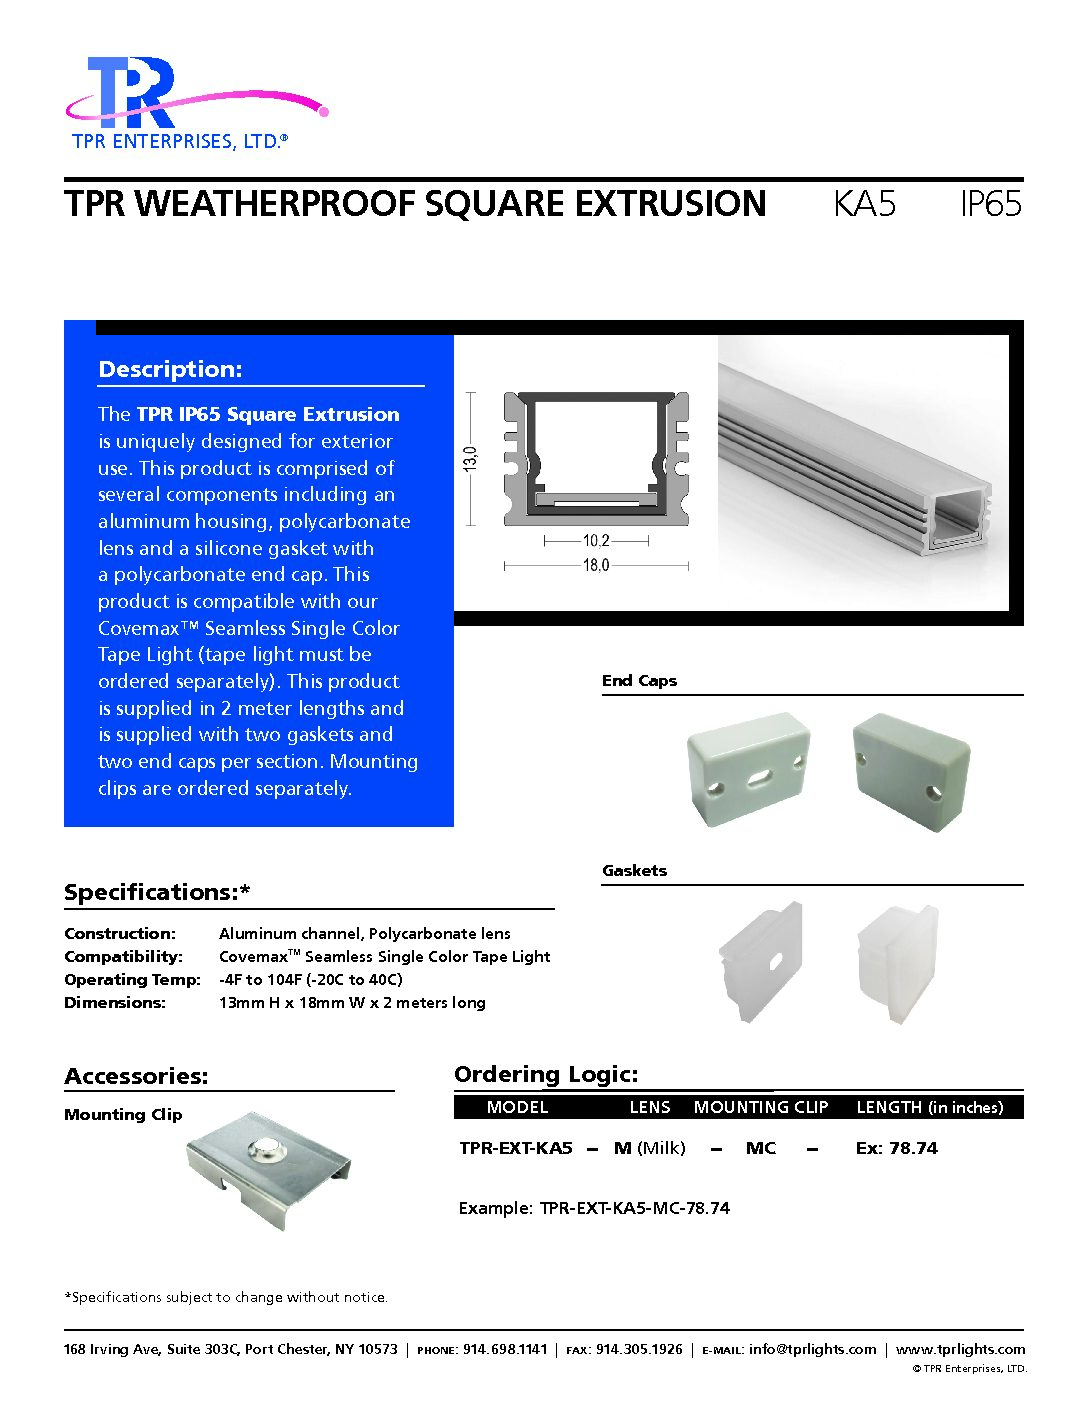 TPR Weatherproof Square Extrusion